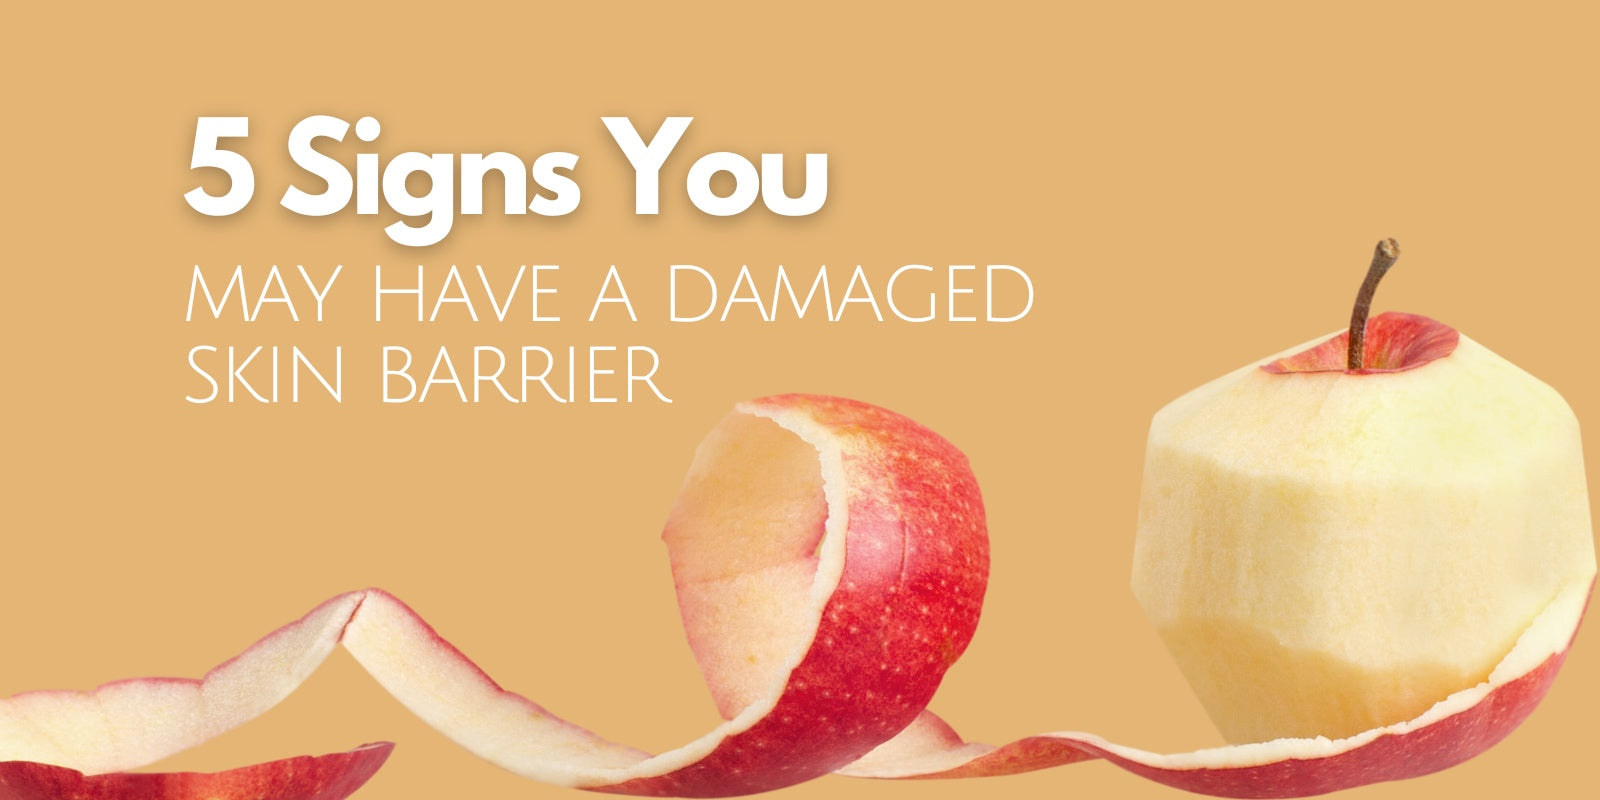 5 signs you have a damaged skin barrier. Victoria BC. Common causes of acne, inflammation and skin dryness